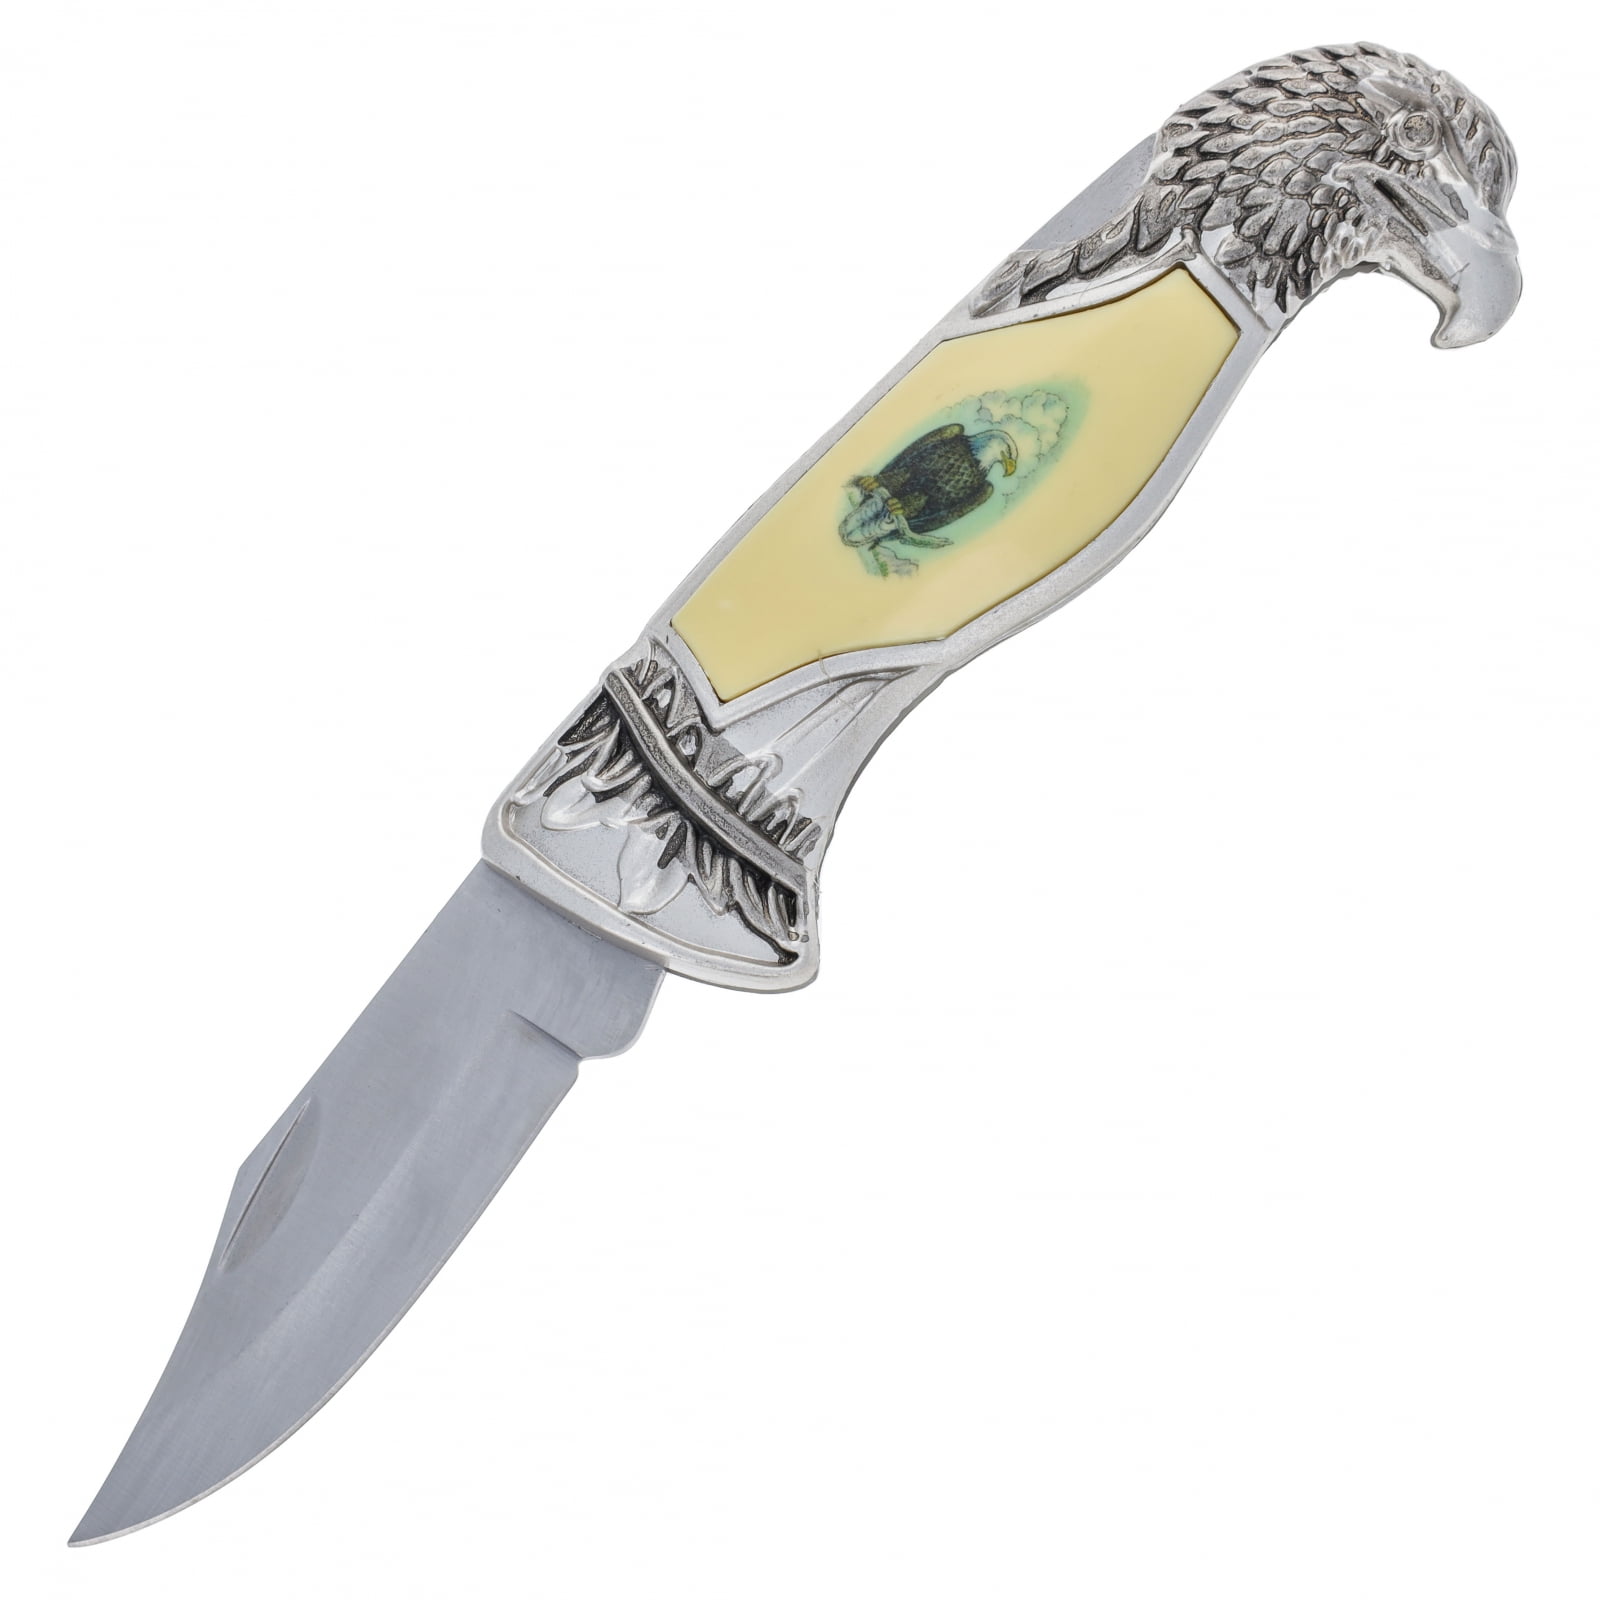  Snake Eye Tactical Every Day Carry Fantasy Design Handle Folding  Pocket-Knife : Sports & Outdoors